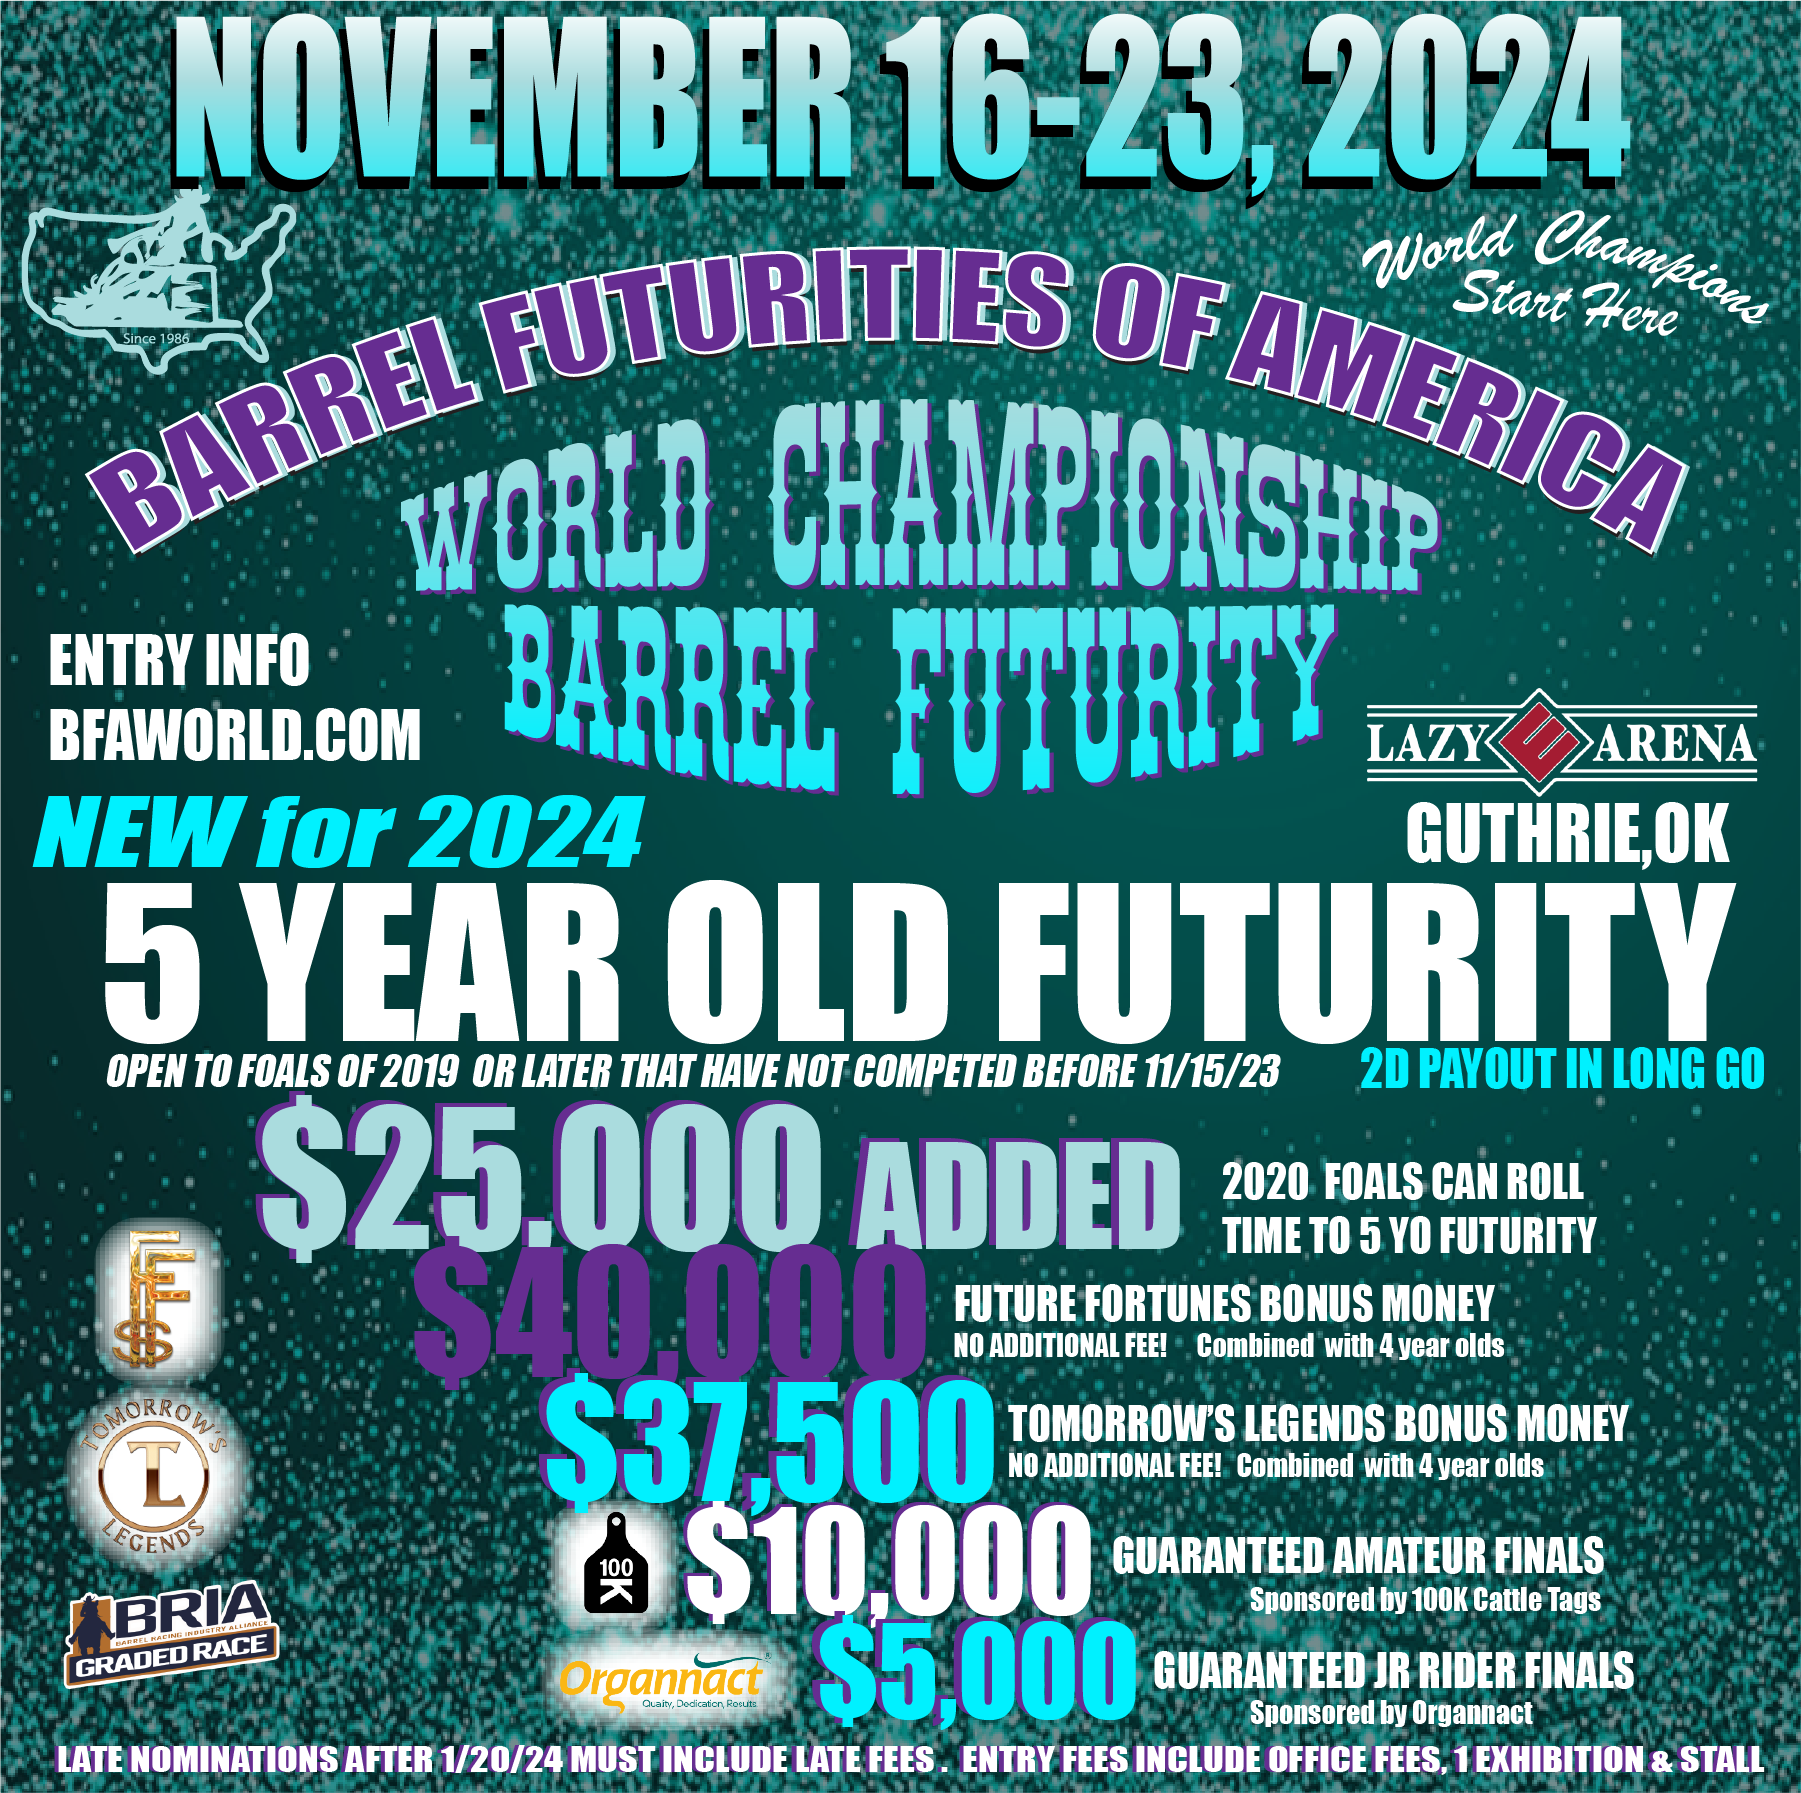 5 Year Old Futurity Class New For 2024